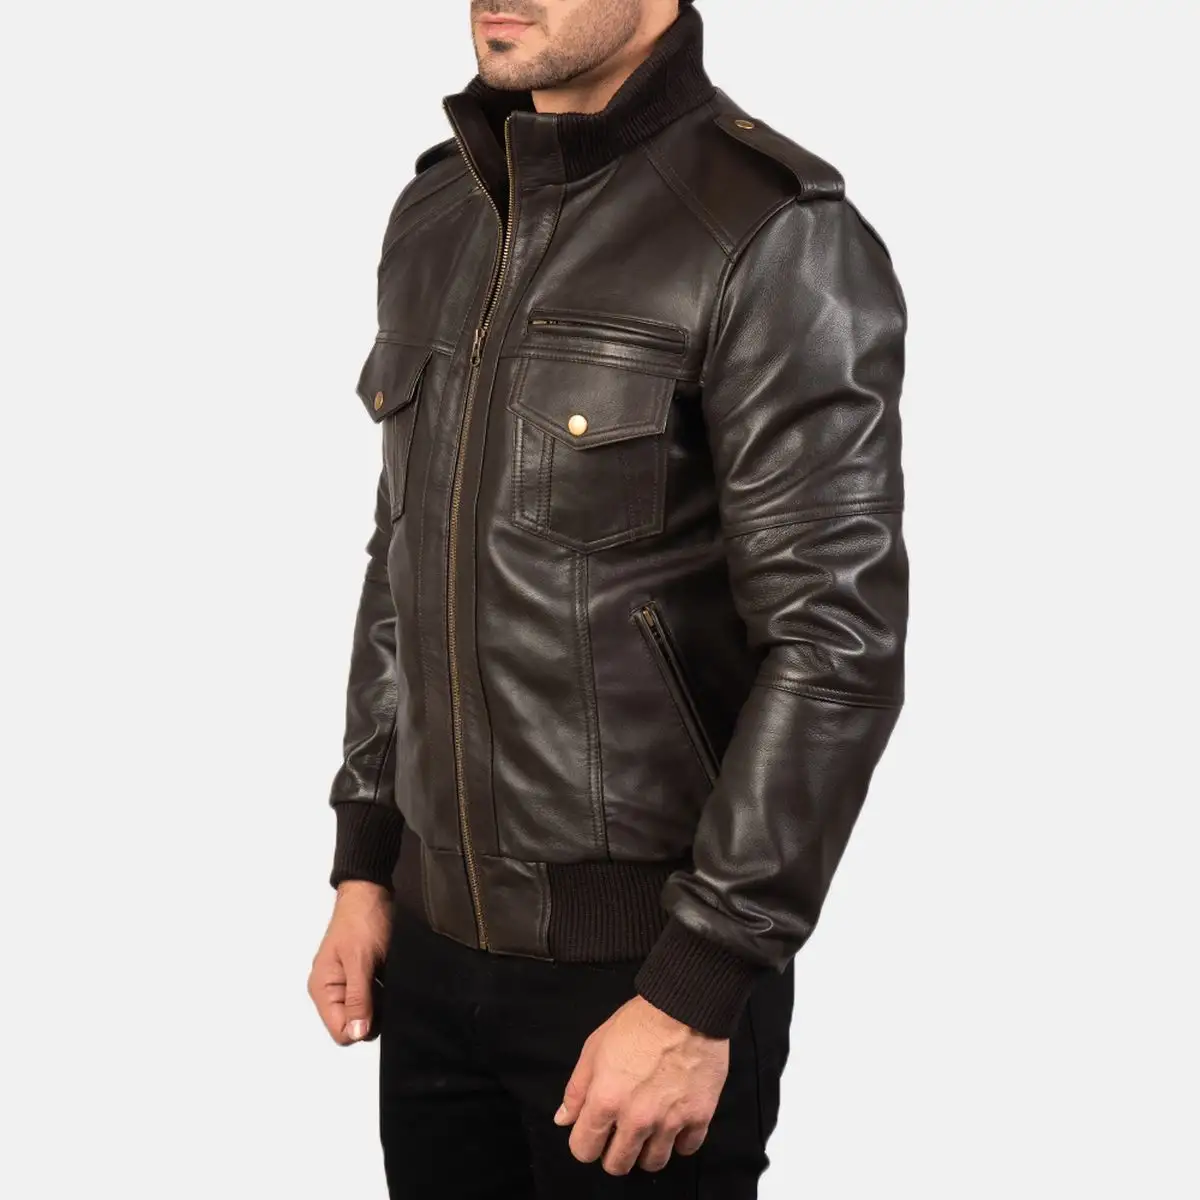 Brown real leather jacket with stand collar 4 front pockets attractive design shoulder strap mens jackets